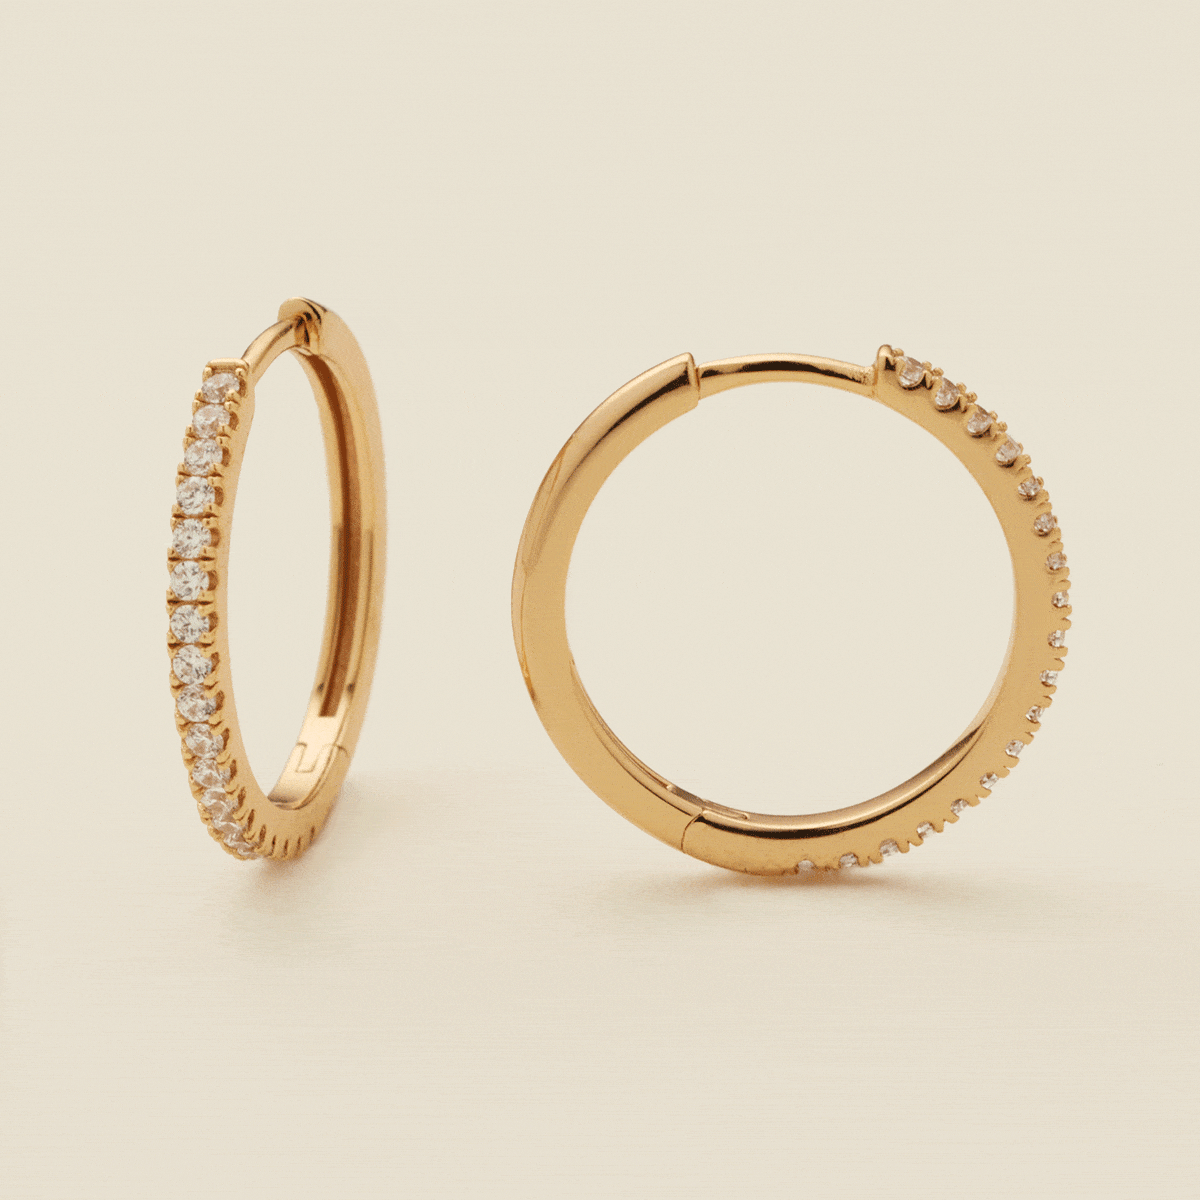 20mm Luxe Hoop & Stacking Band Set Jewelry Set